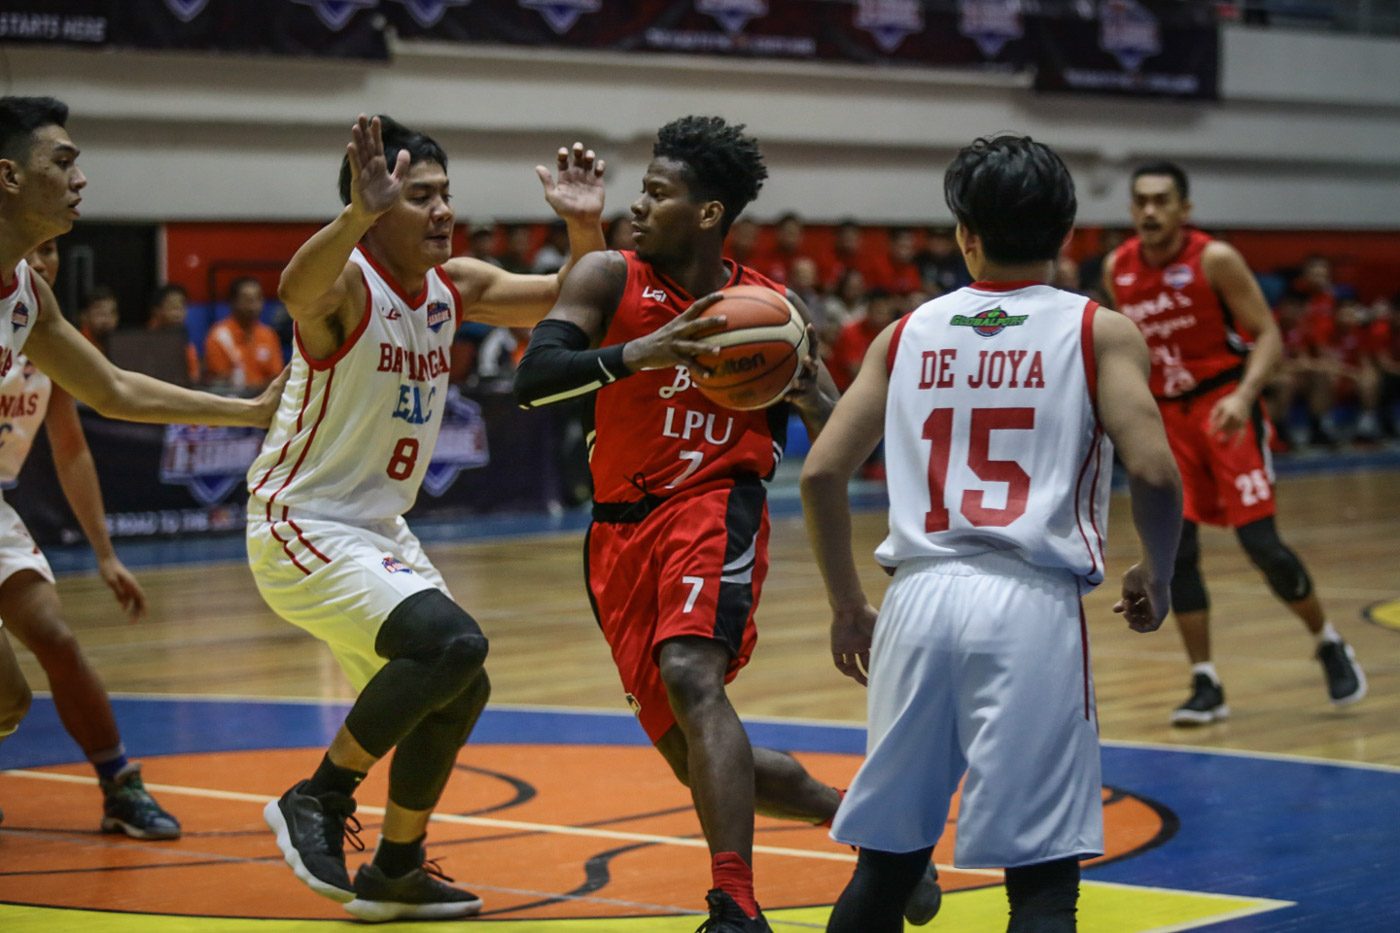 Zark’s-LPU avenges opening day loss, destroys EAC by 37 points